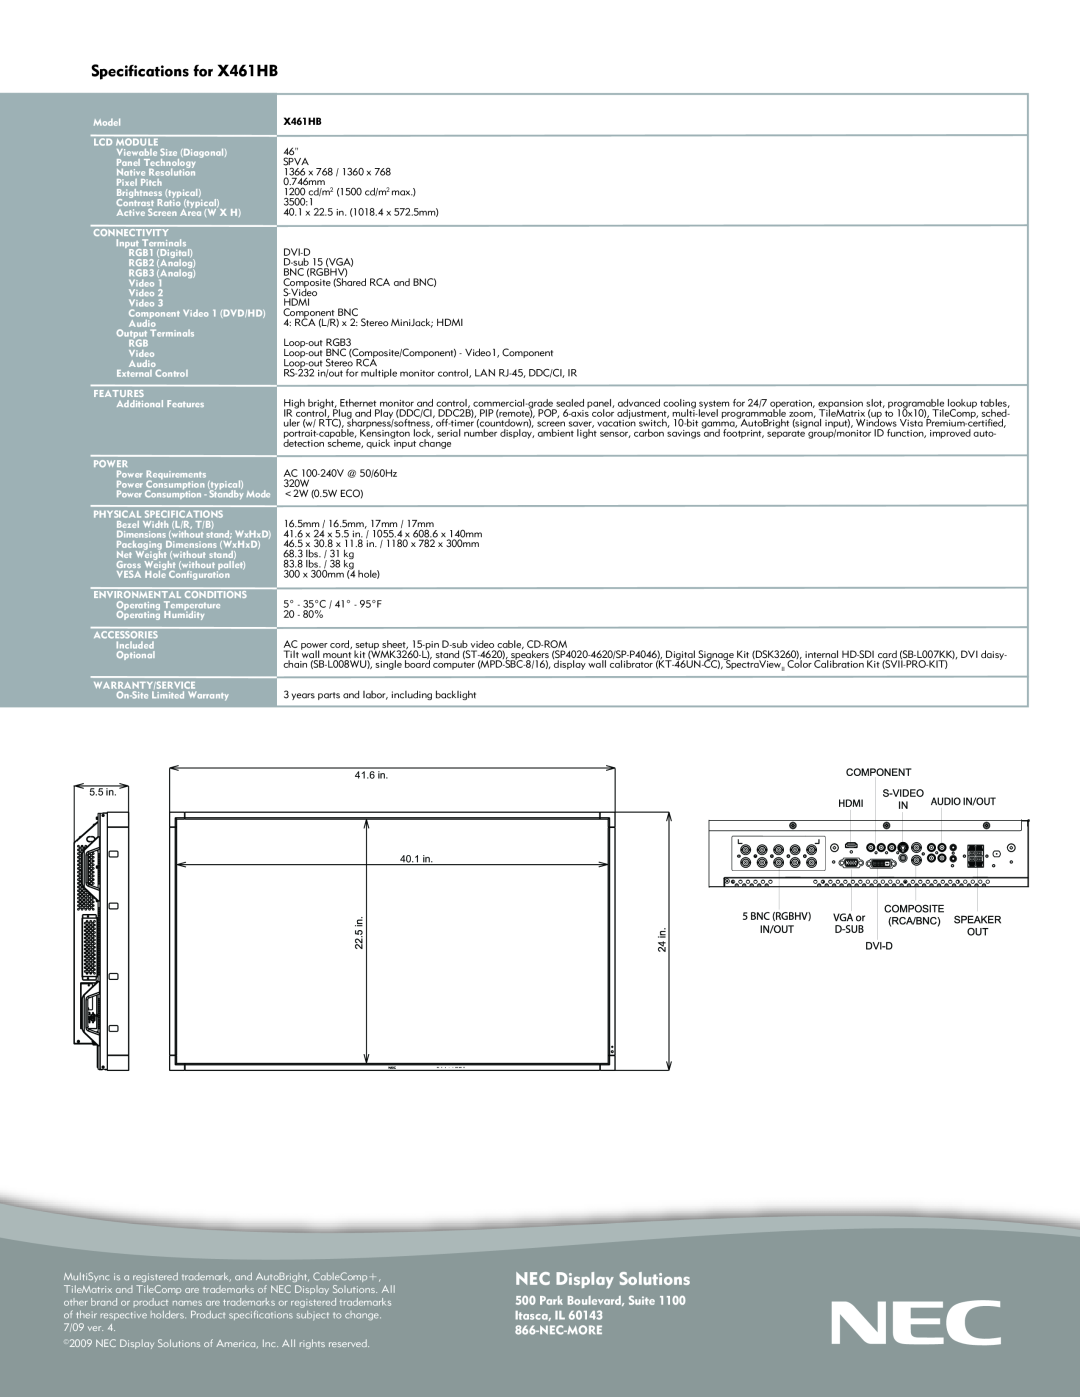 NEC manual NEC Display Solutions, Specifications for X461HB, Park Boulevard, Suite Itasca, IL 866-NEC-MORE 